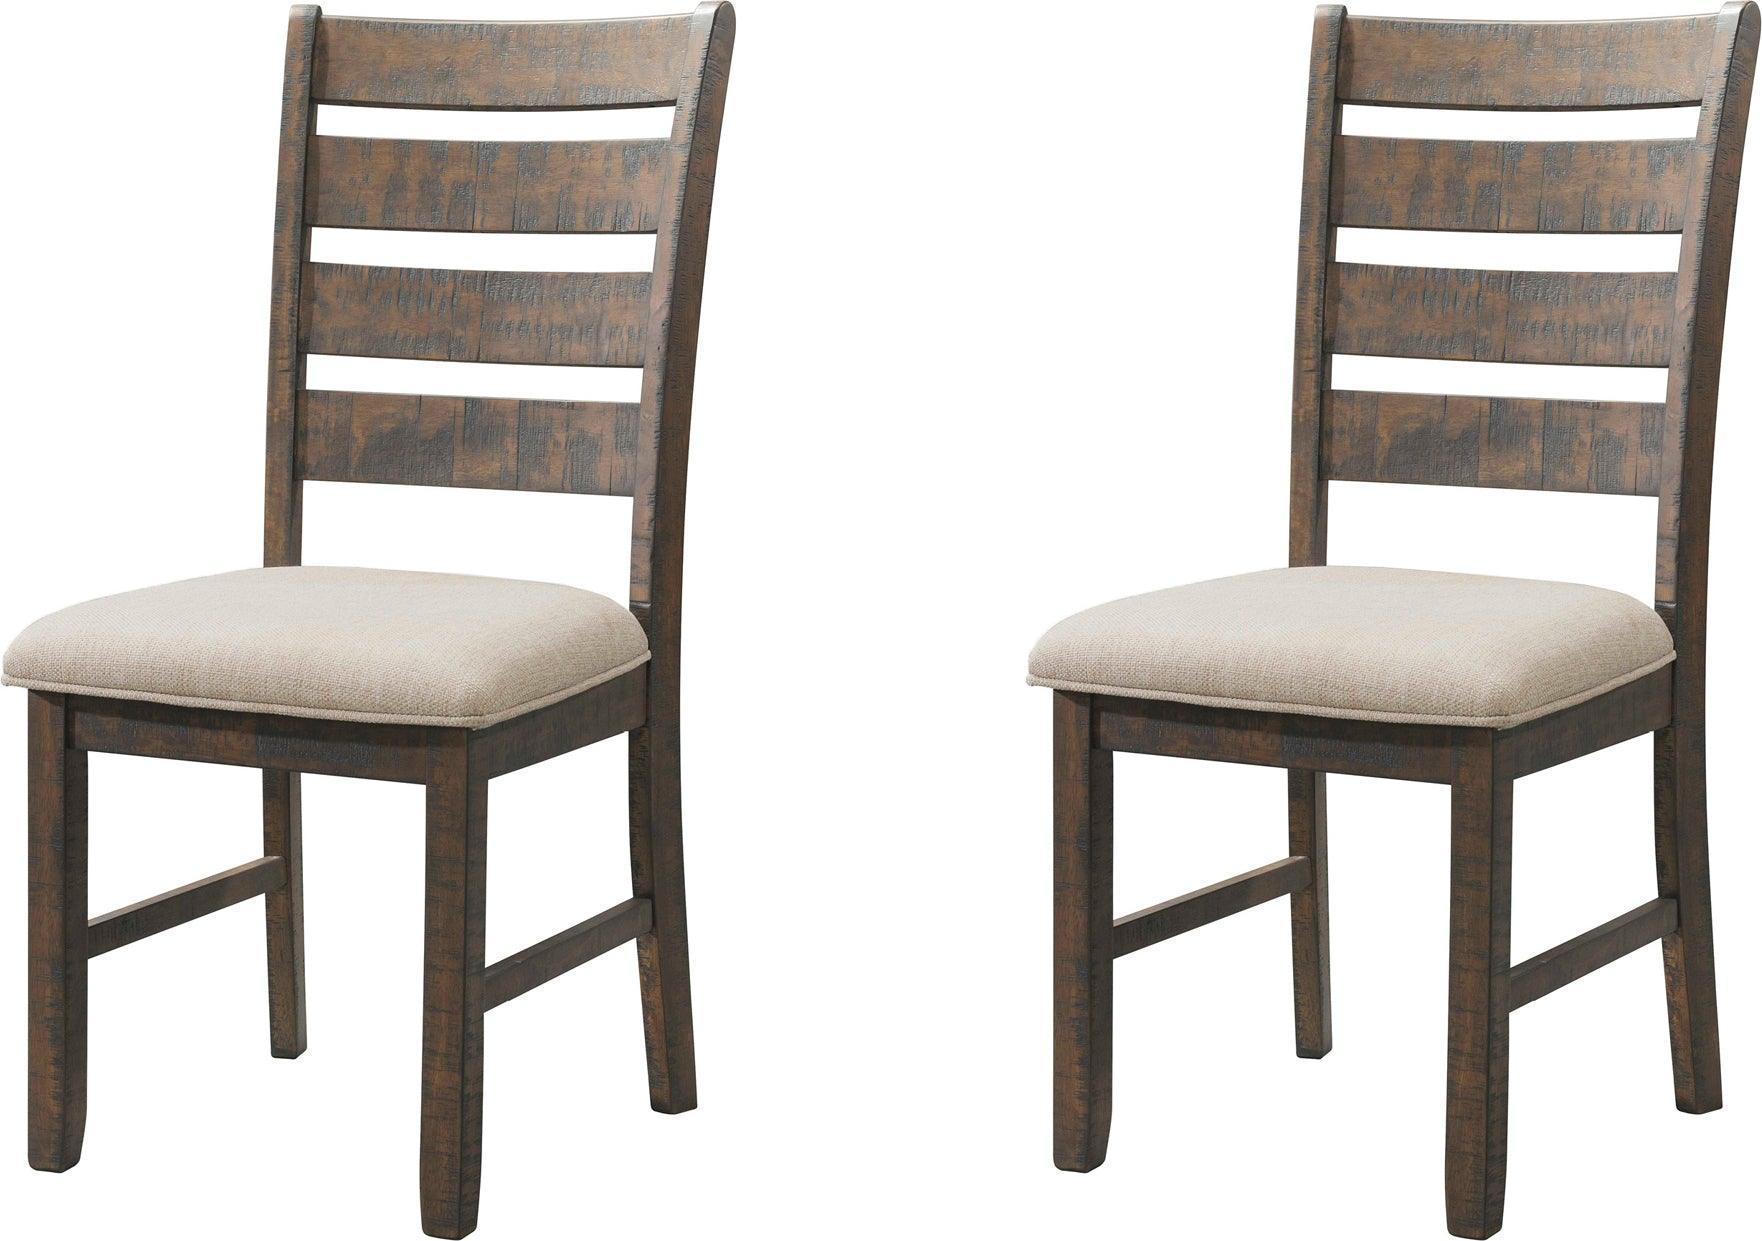 Elements Dining Chairs - Dex Ladder Back Side Chair Set (Set of 2)